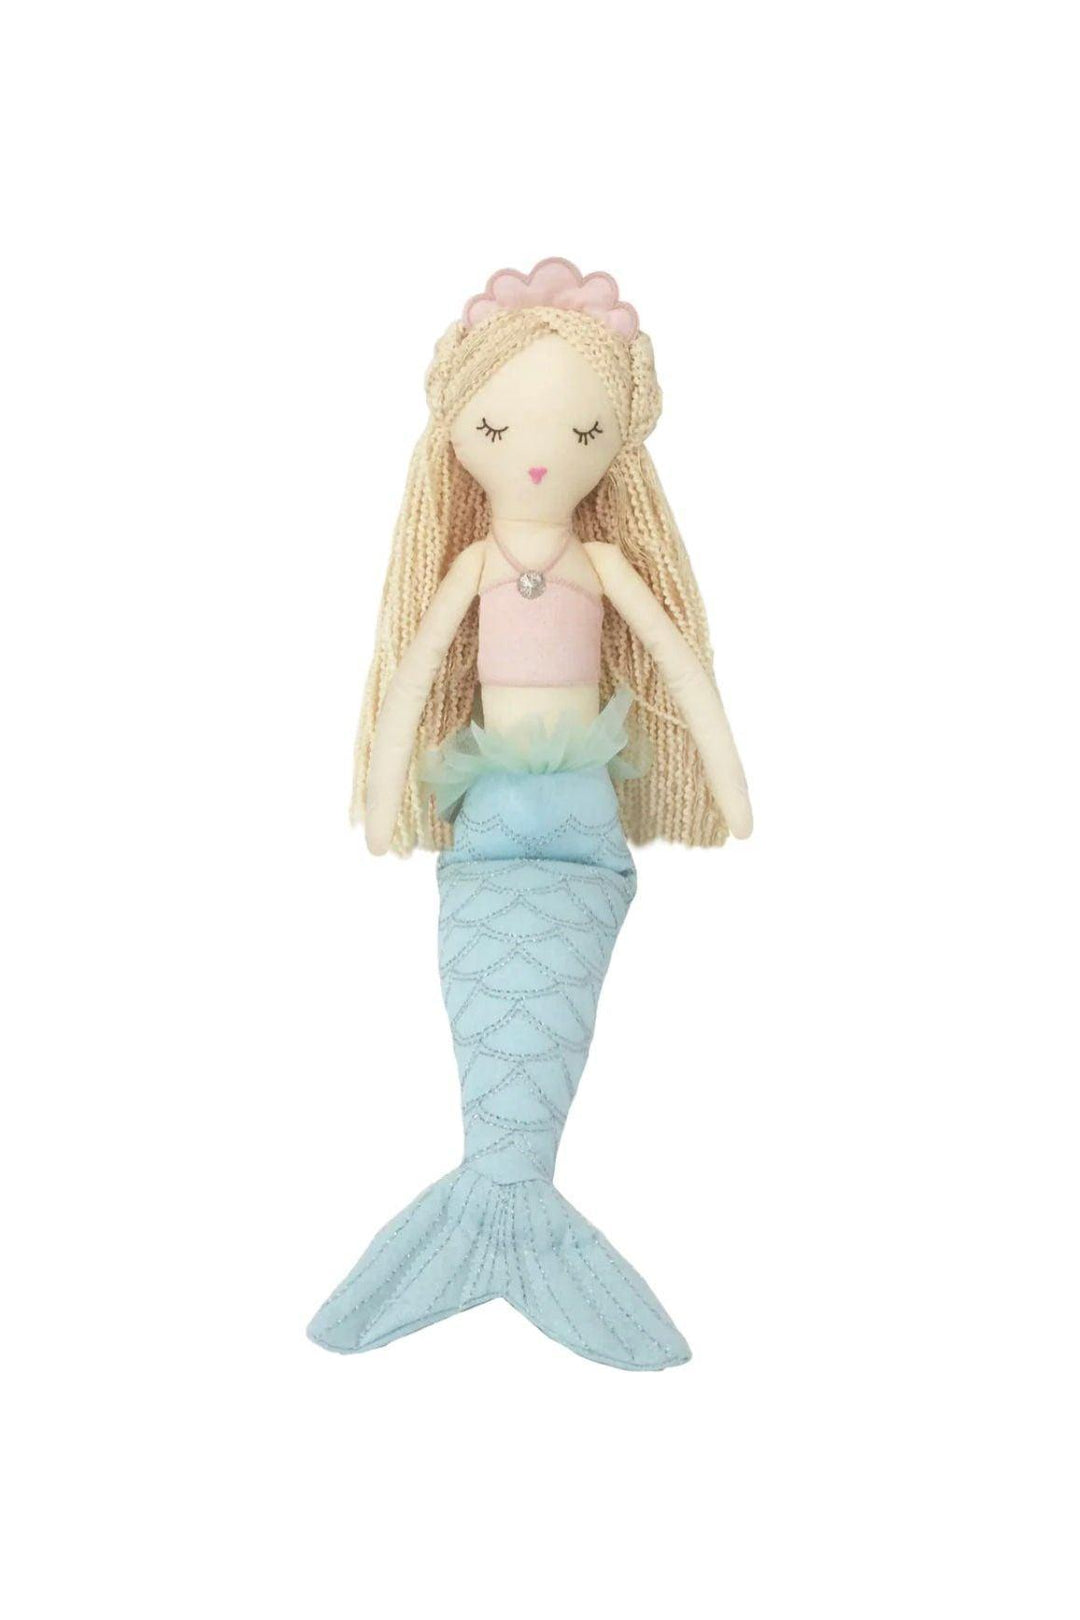 15-inch-mimi-the-mermaid-doll-silver-scales-and-yarn-hair-sophia-rose-children-s-boutique-1 - Sophia Rose Children's Boutique